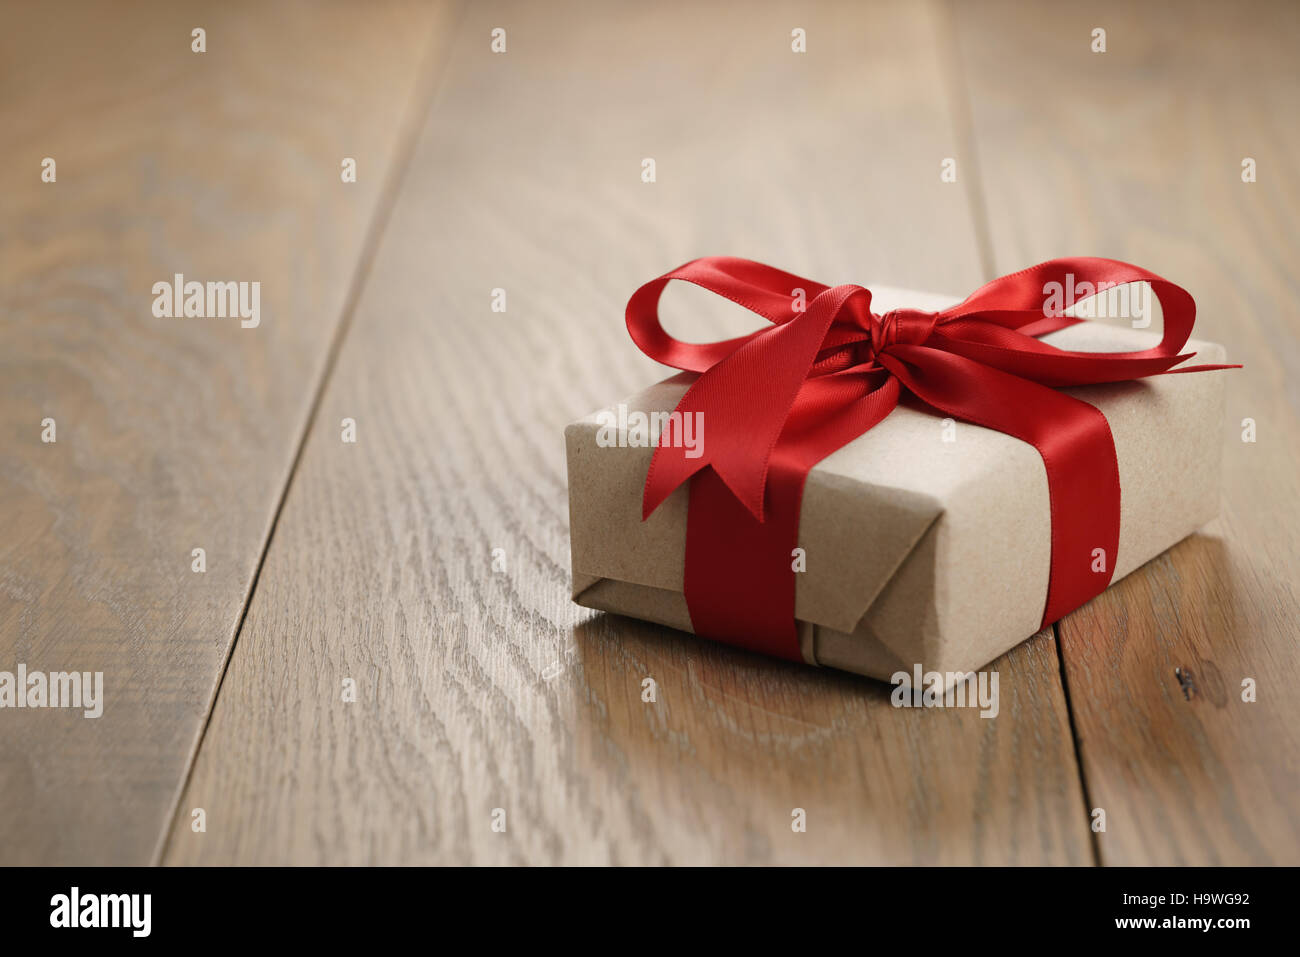 rustic craft paper gift box with red ribbon bow on wood table Stock Photo